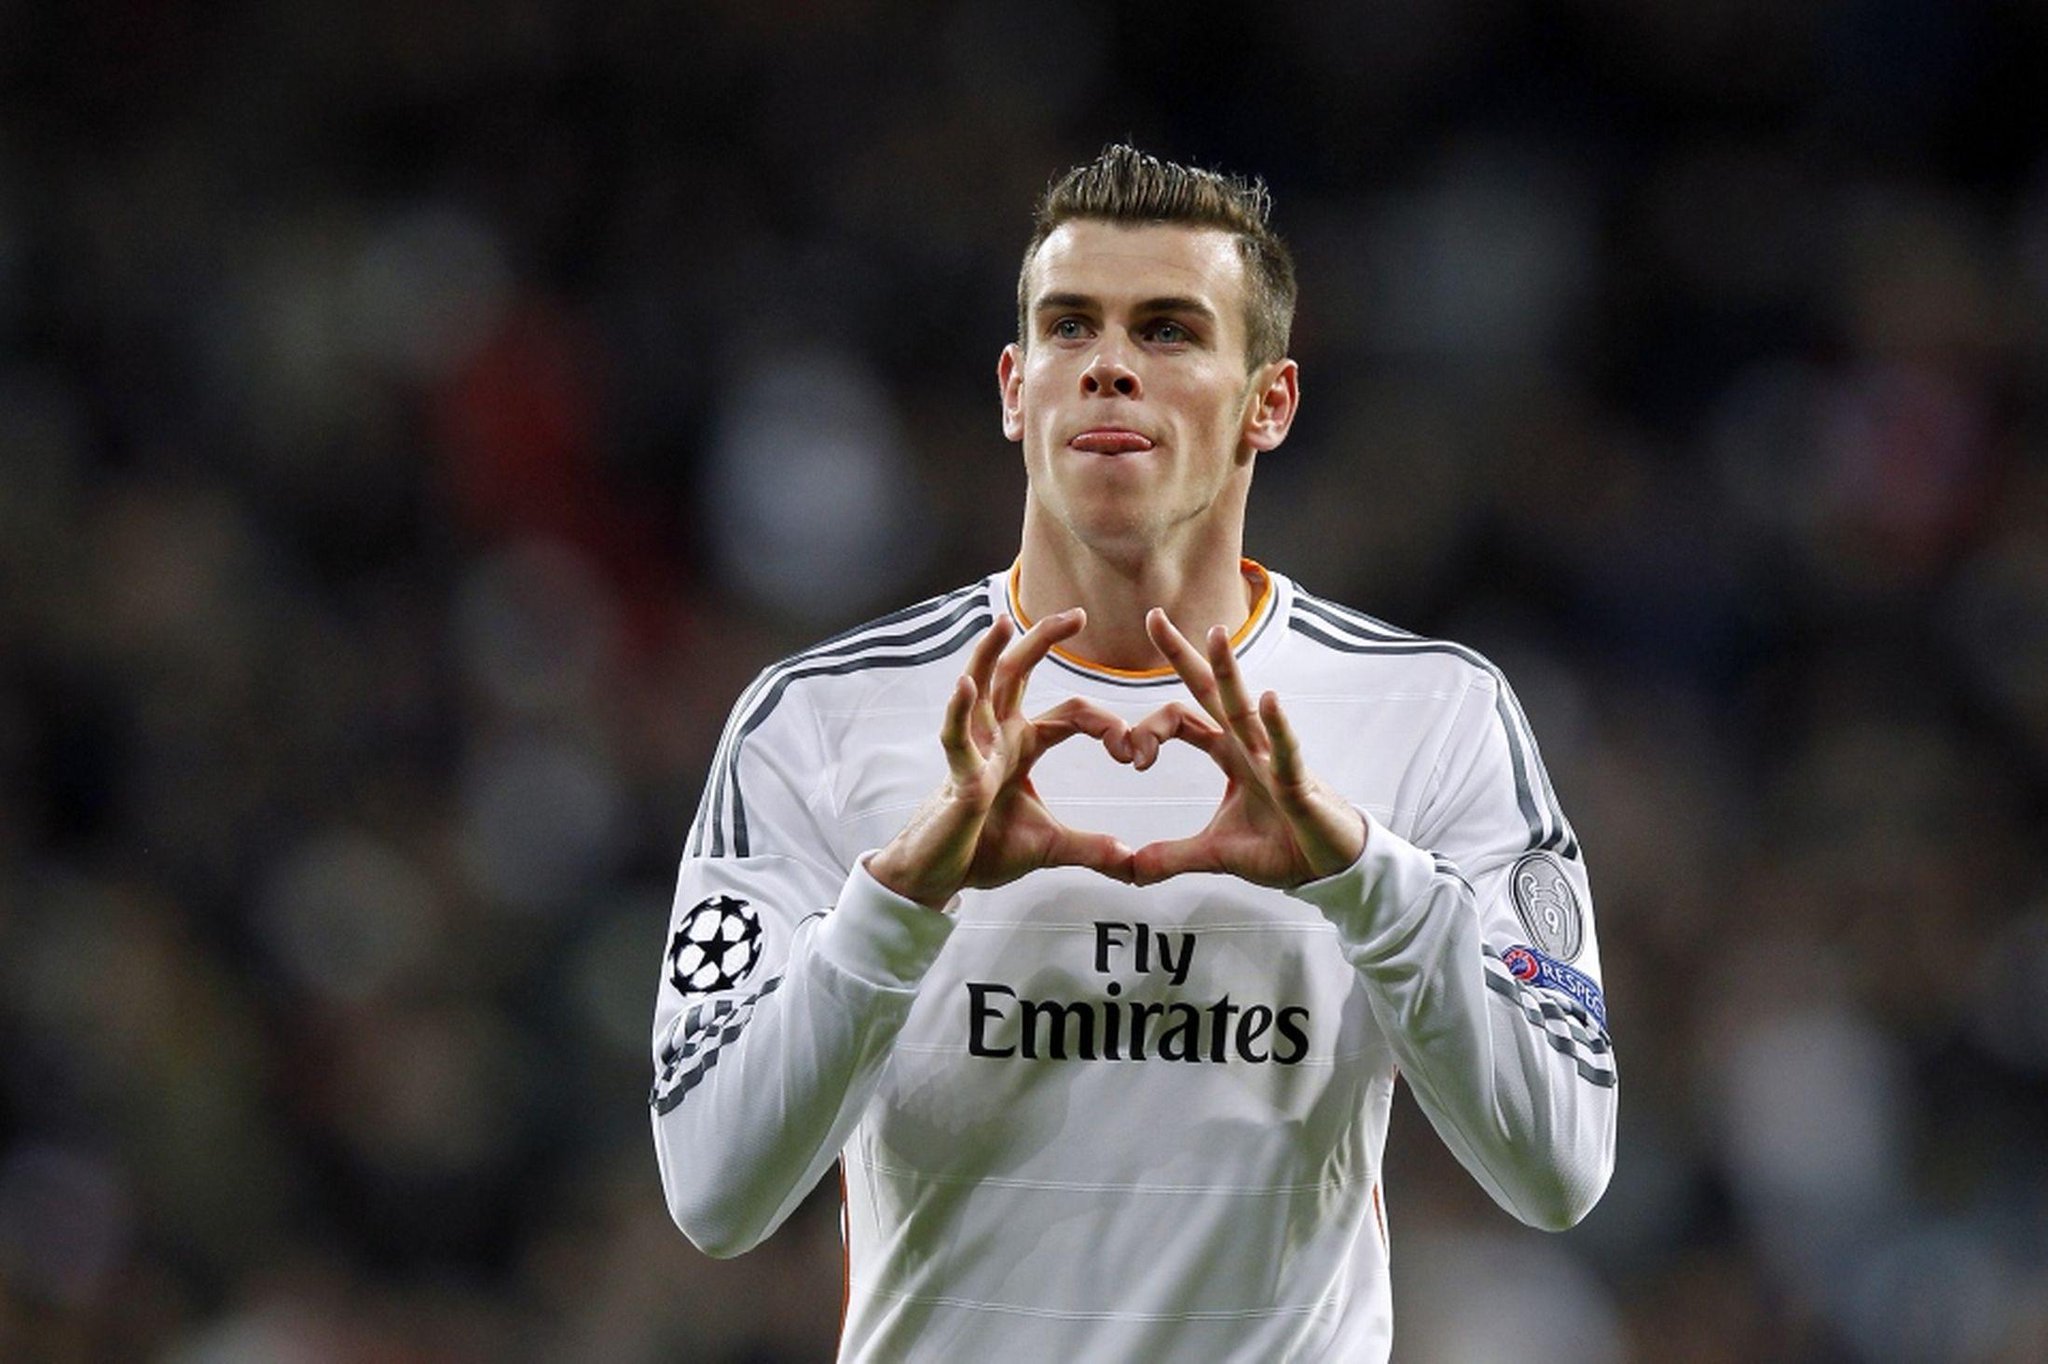 Happy birthday to star Gareth Bale, who turns 26 today! 